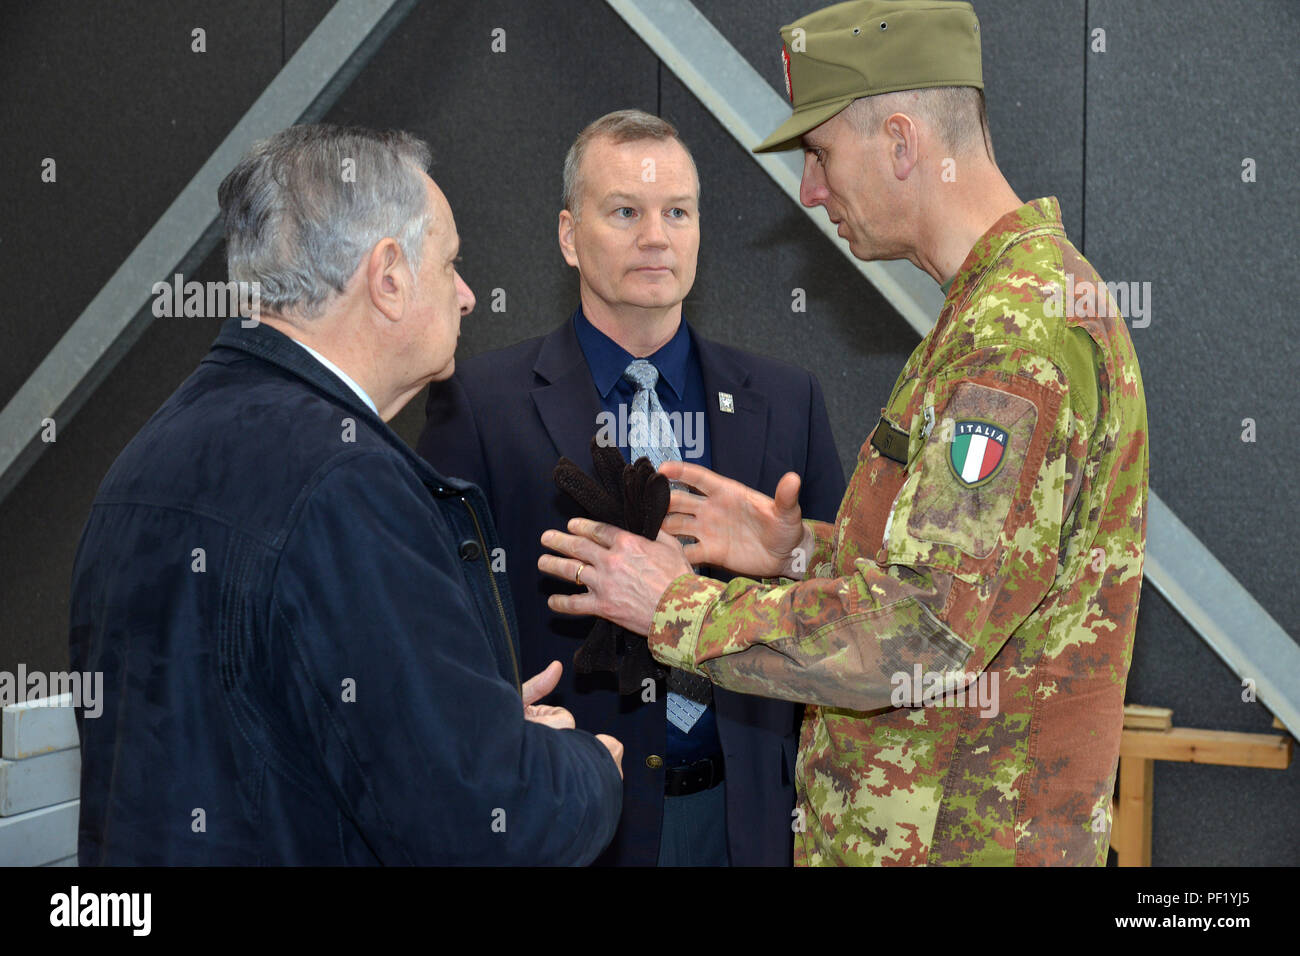 Italian Army Brig. Gen. Michele Risi, Multinational Land Force “Julia” Alpine Brigade Commander (right) speaks with  James V. Matheson, Chief, U.S. Army Regional Training Support Division (center), Ivano Trevisanutto, Chief, U.S. Army Training Support Center Italy (left), tour the RTSD South in Caserma Ederle, Vicenza, Italy, Feb. 24, 2016. Italian Army visit U.S. Army RTSD South, in order to enhance to bilateral relations and to expand levels of cooperation and the capacity of the personnel involved in joint operations. (Photo by Visual Information Specialist Paolo Bovo/Released) Stock Photo